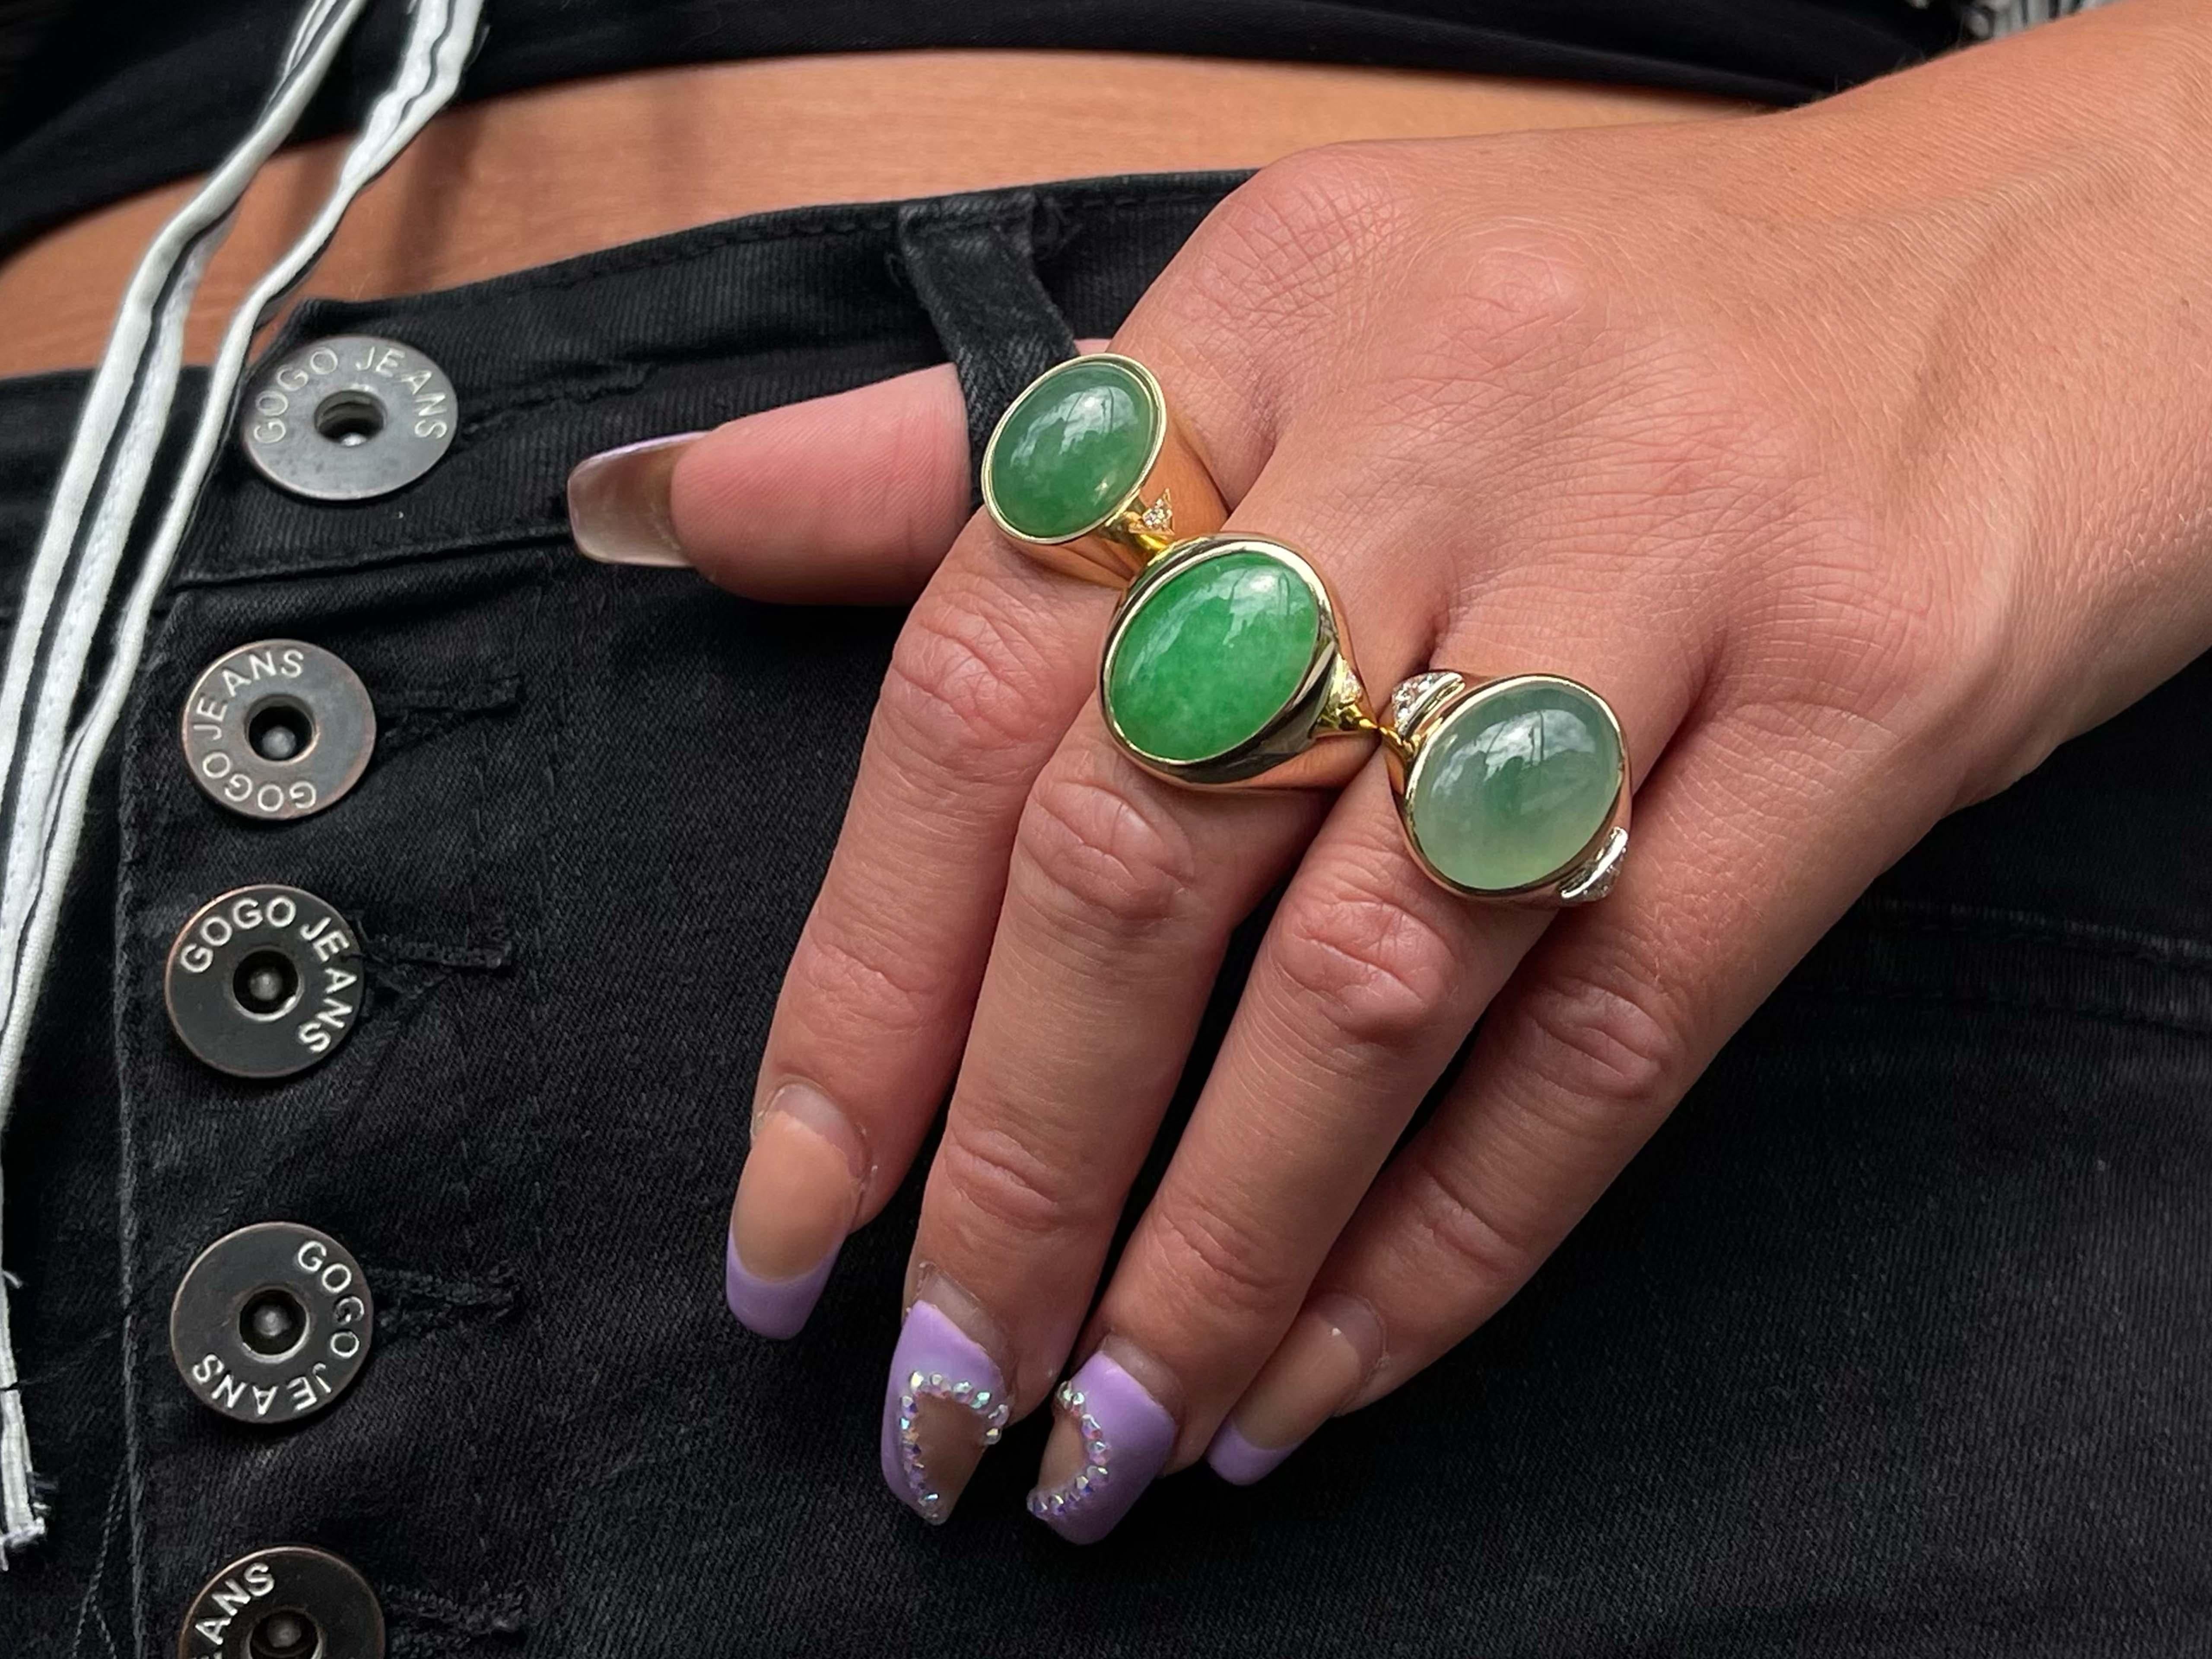 Men's Oval Green Water Jadeite Jade and 6 Diamond Ring in 14k Yellow Gold. This stunning jade has a one-of-a-kind color with beautiful translucency. The Jade measures approximately 17.37 mm x 13.33 mm x 7.50 mm. The ring has a total of 6 diamonds.